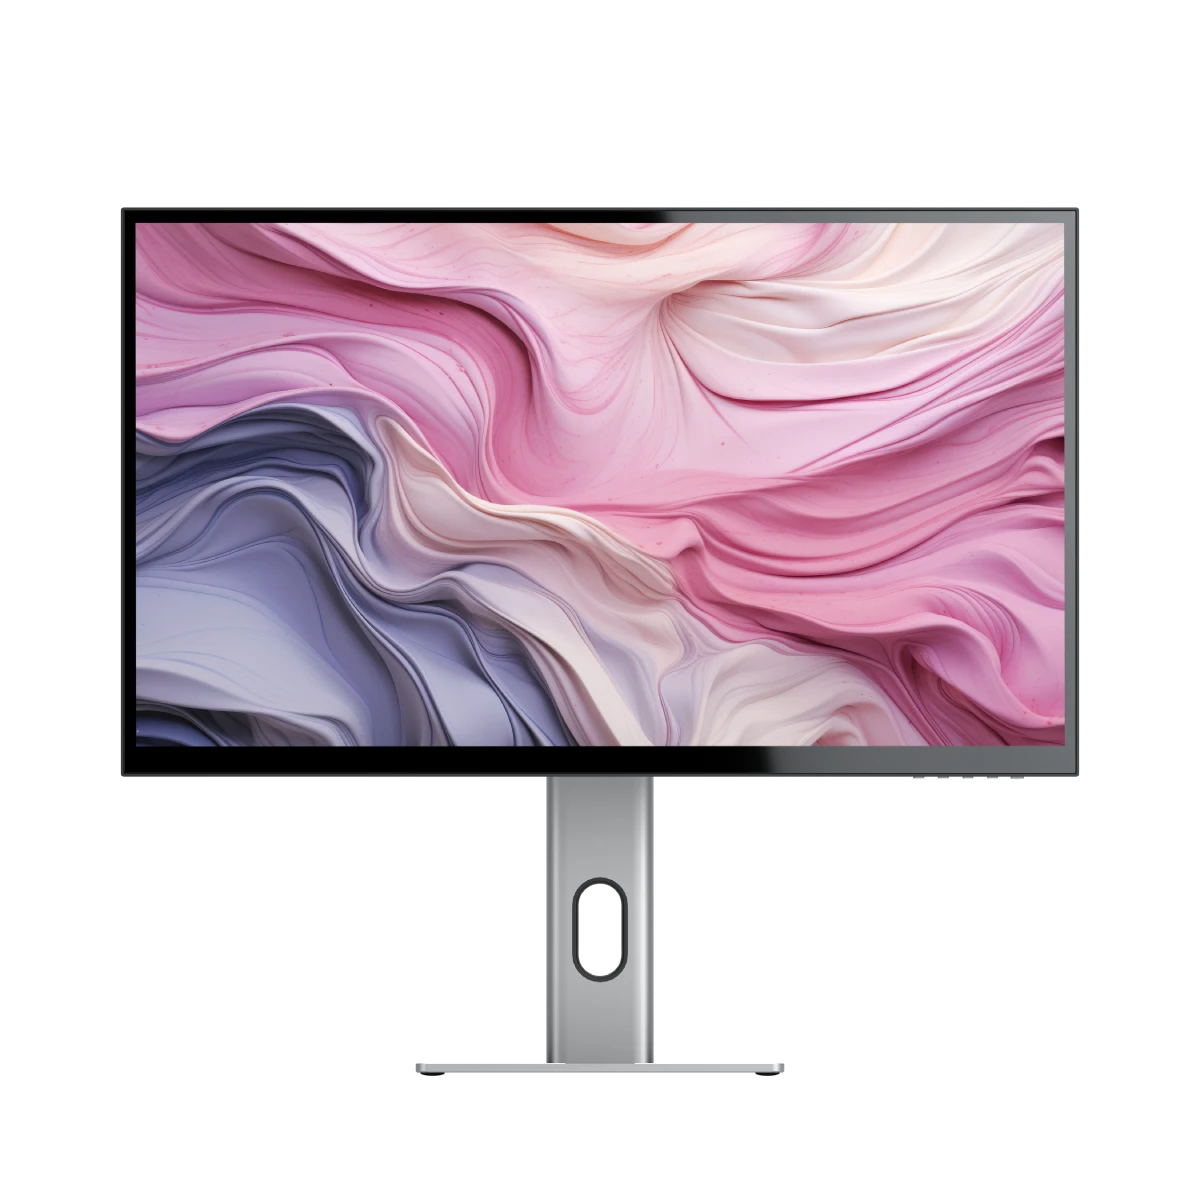 clarity-27-uhd-4k-monitor-pack-of-2_2